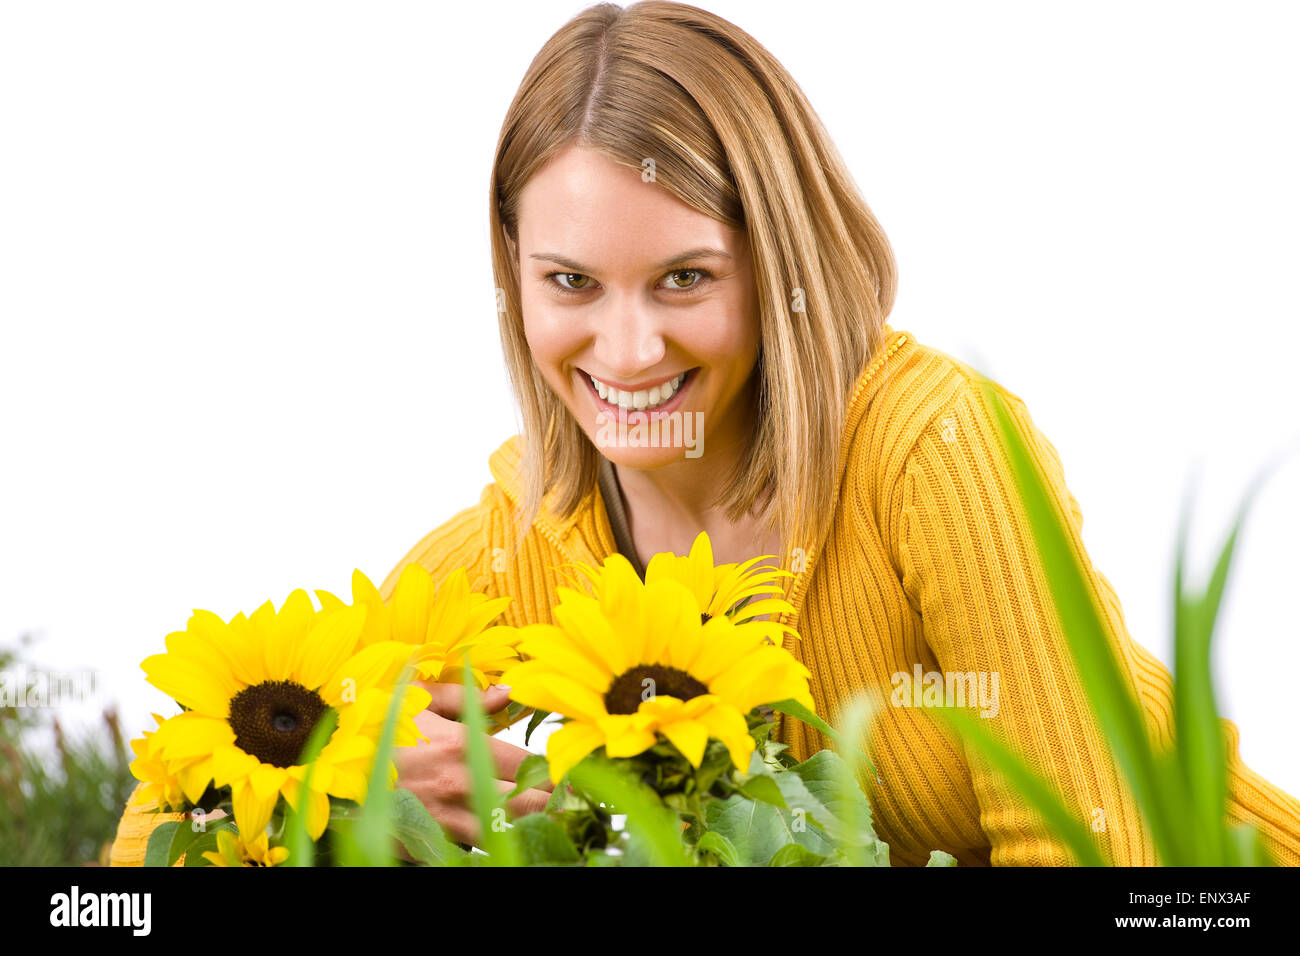 Gardening - portrait of smiling woman with sunflowers Stock Photo